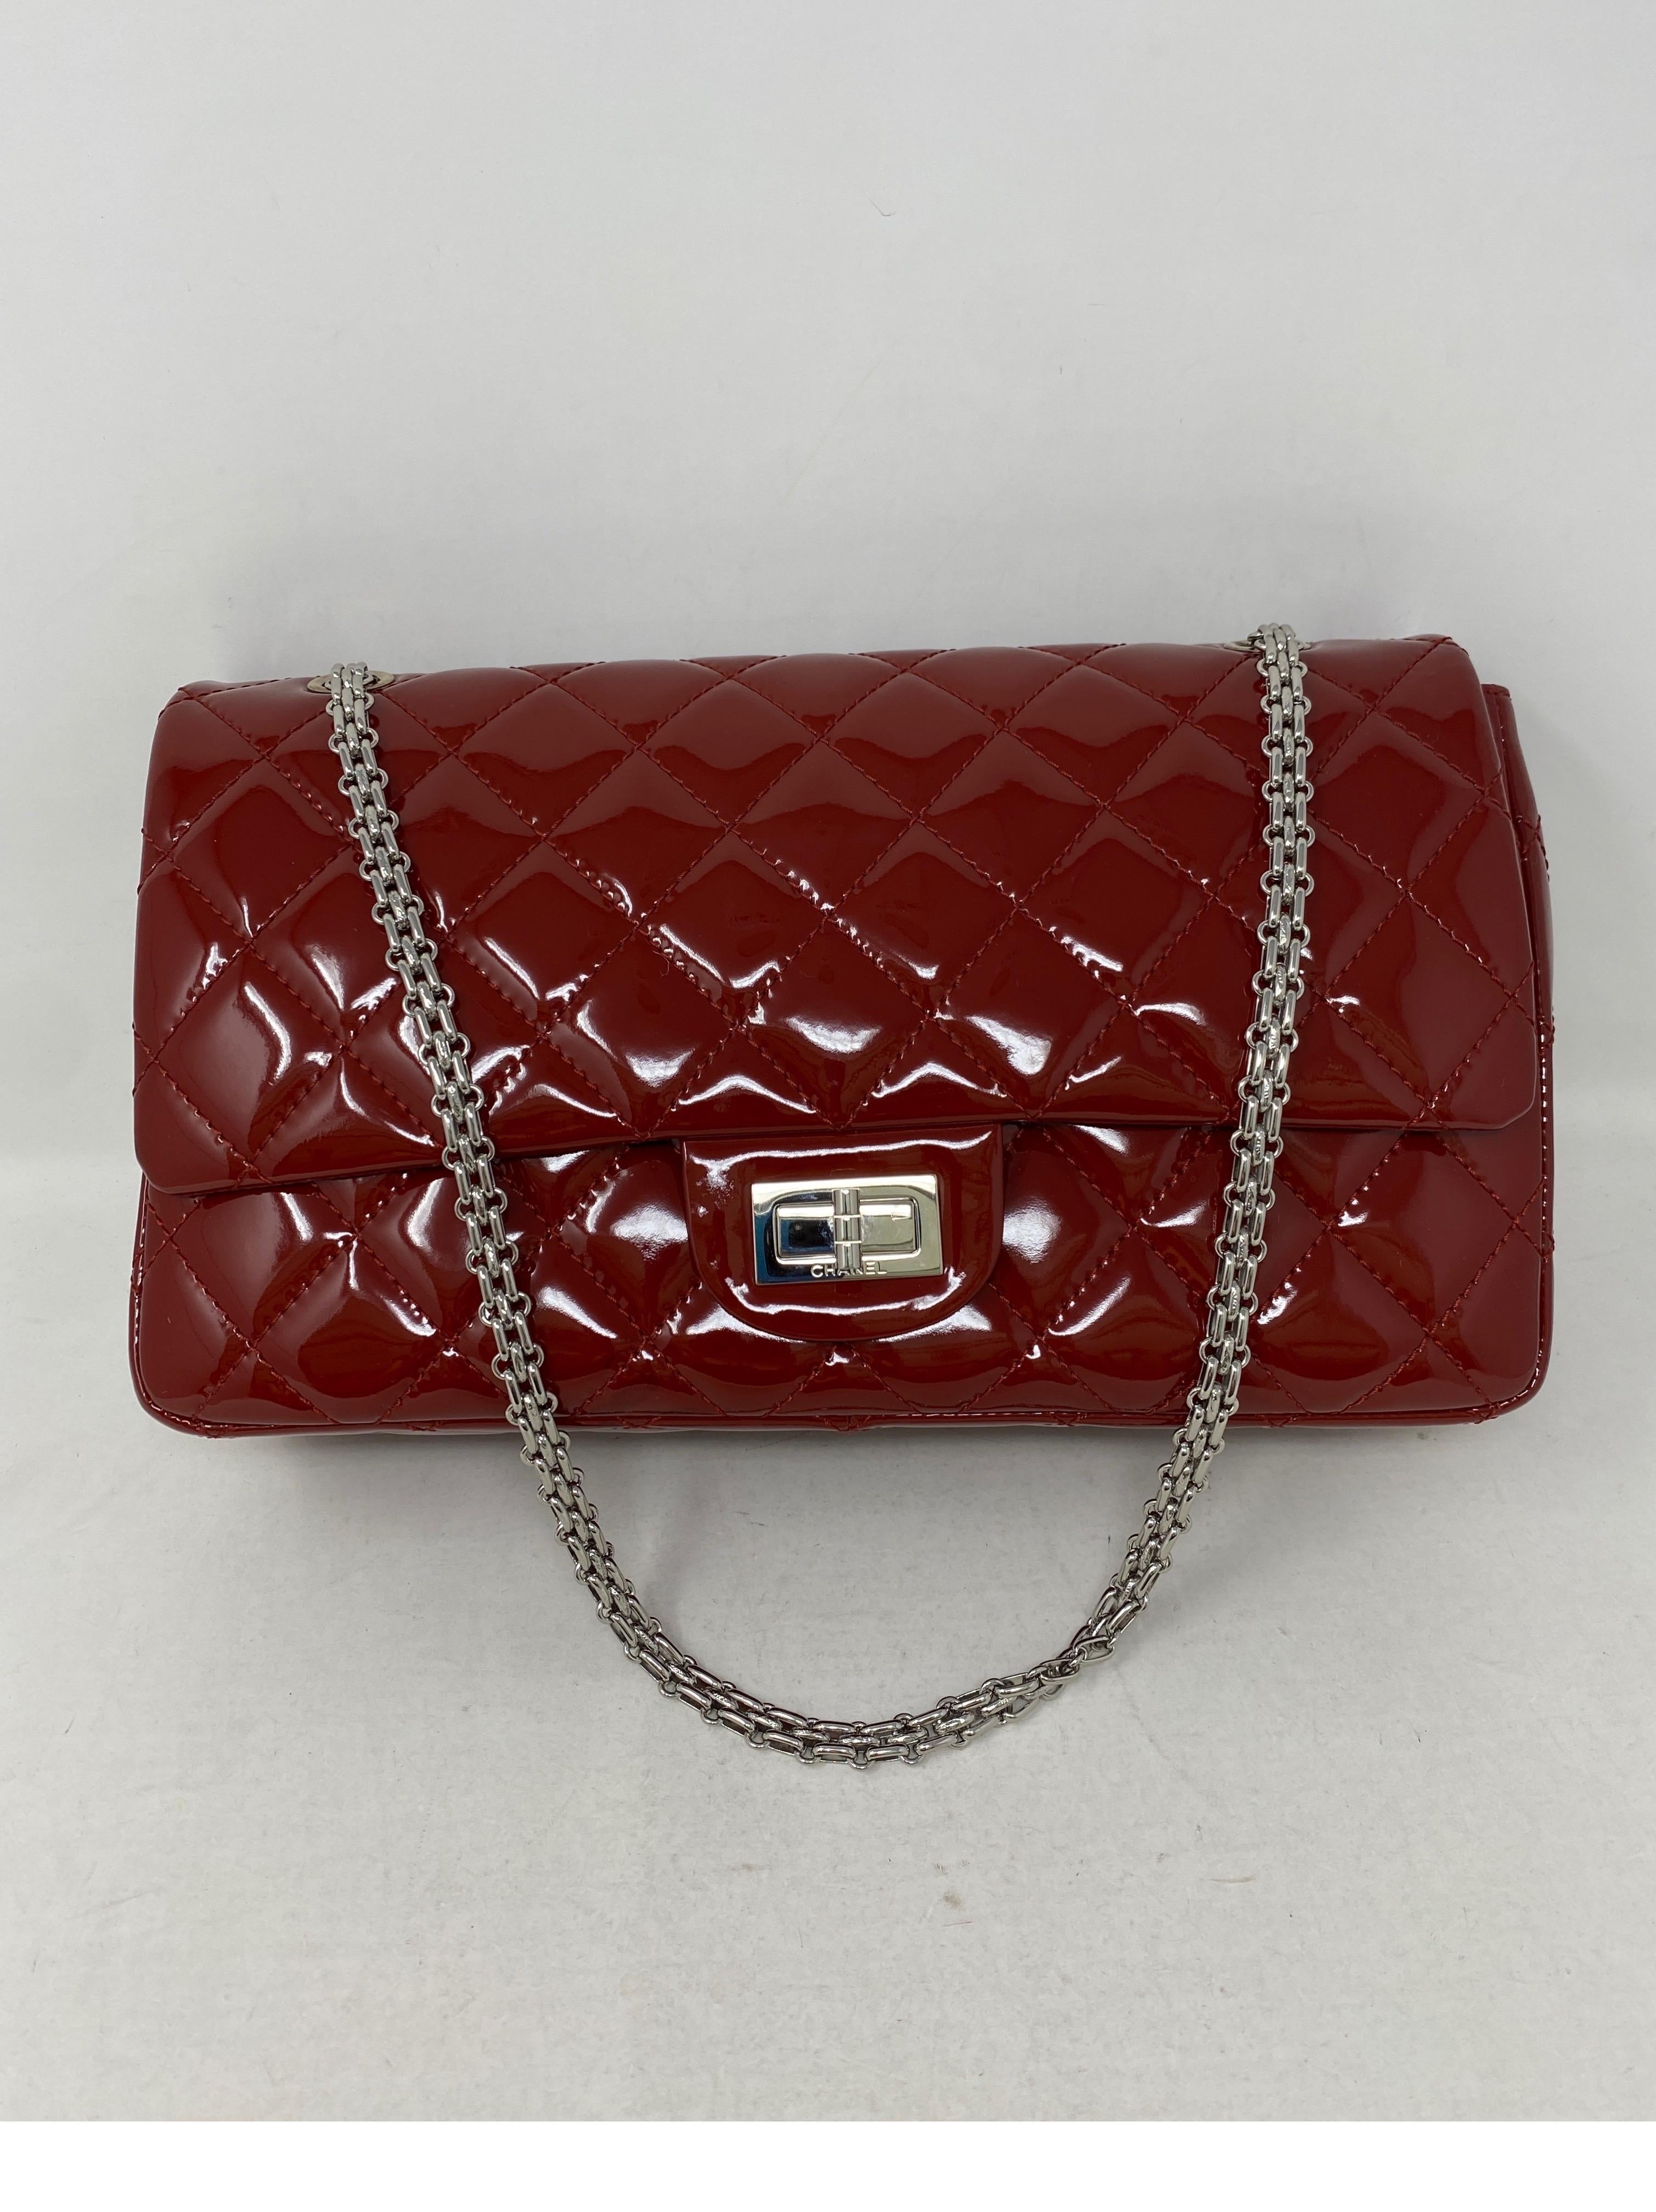 Chanel Reissue Jumbo Red Patent Leather Bag. Silver Chain. Can be worn crossbody or doubled as a shoulder bag. Excellent like new condition. Guaranteed authentic. 